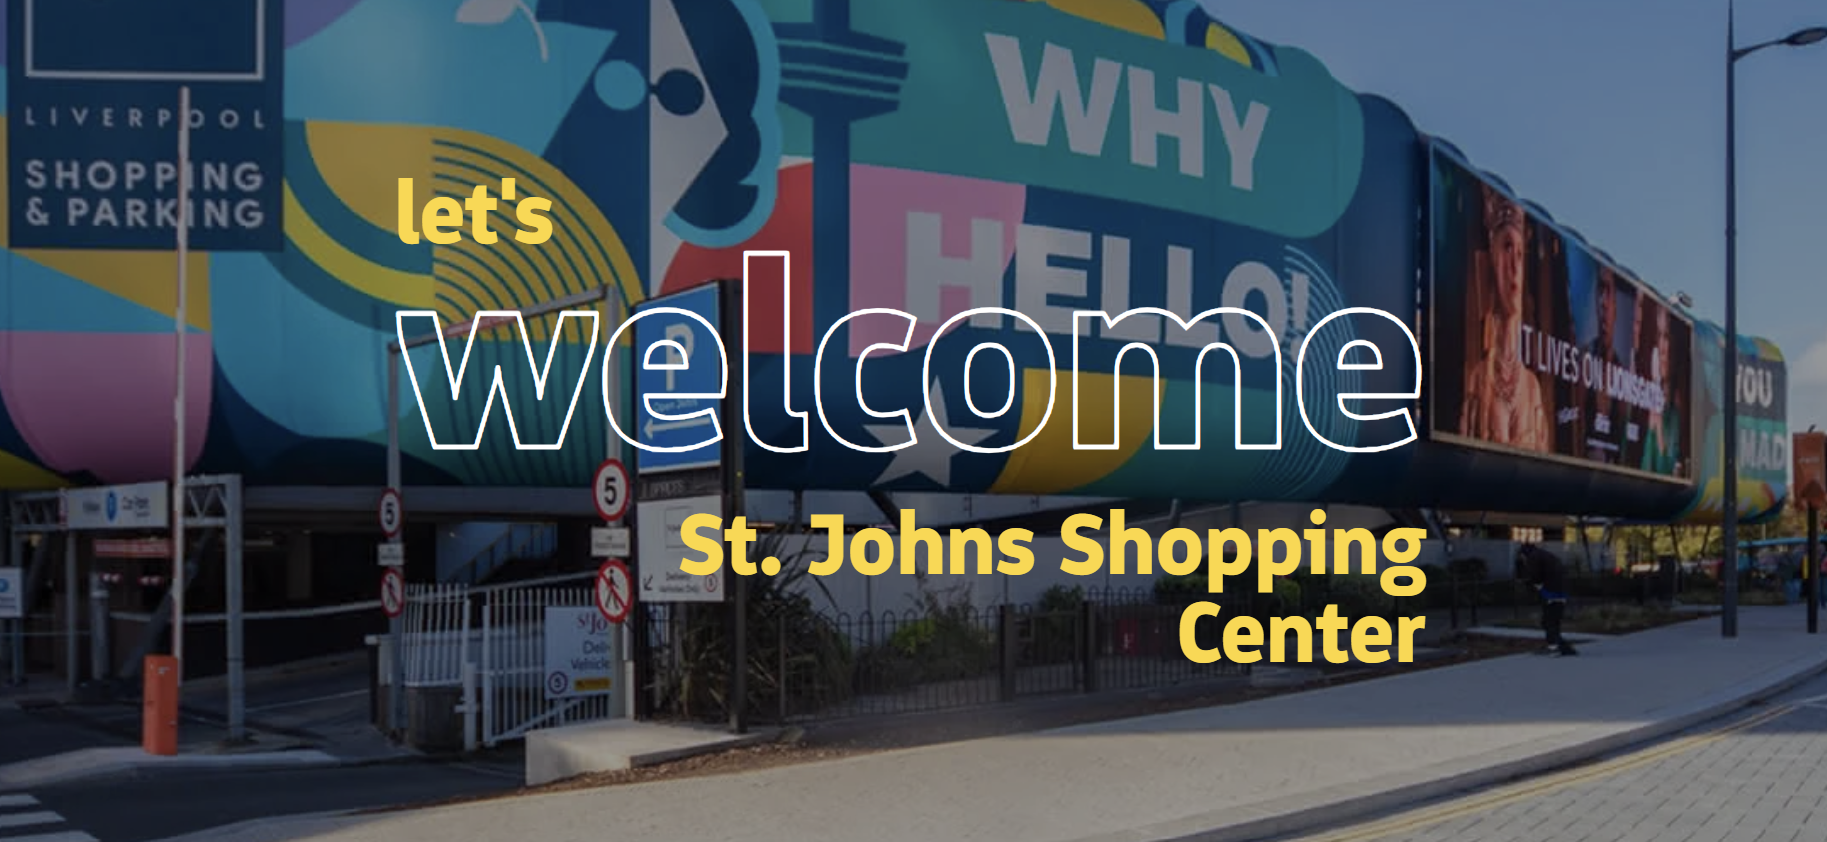 St. Johns Shopping Center in Liverpool embarked on an ambitious project to revitalize its parking facilities.